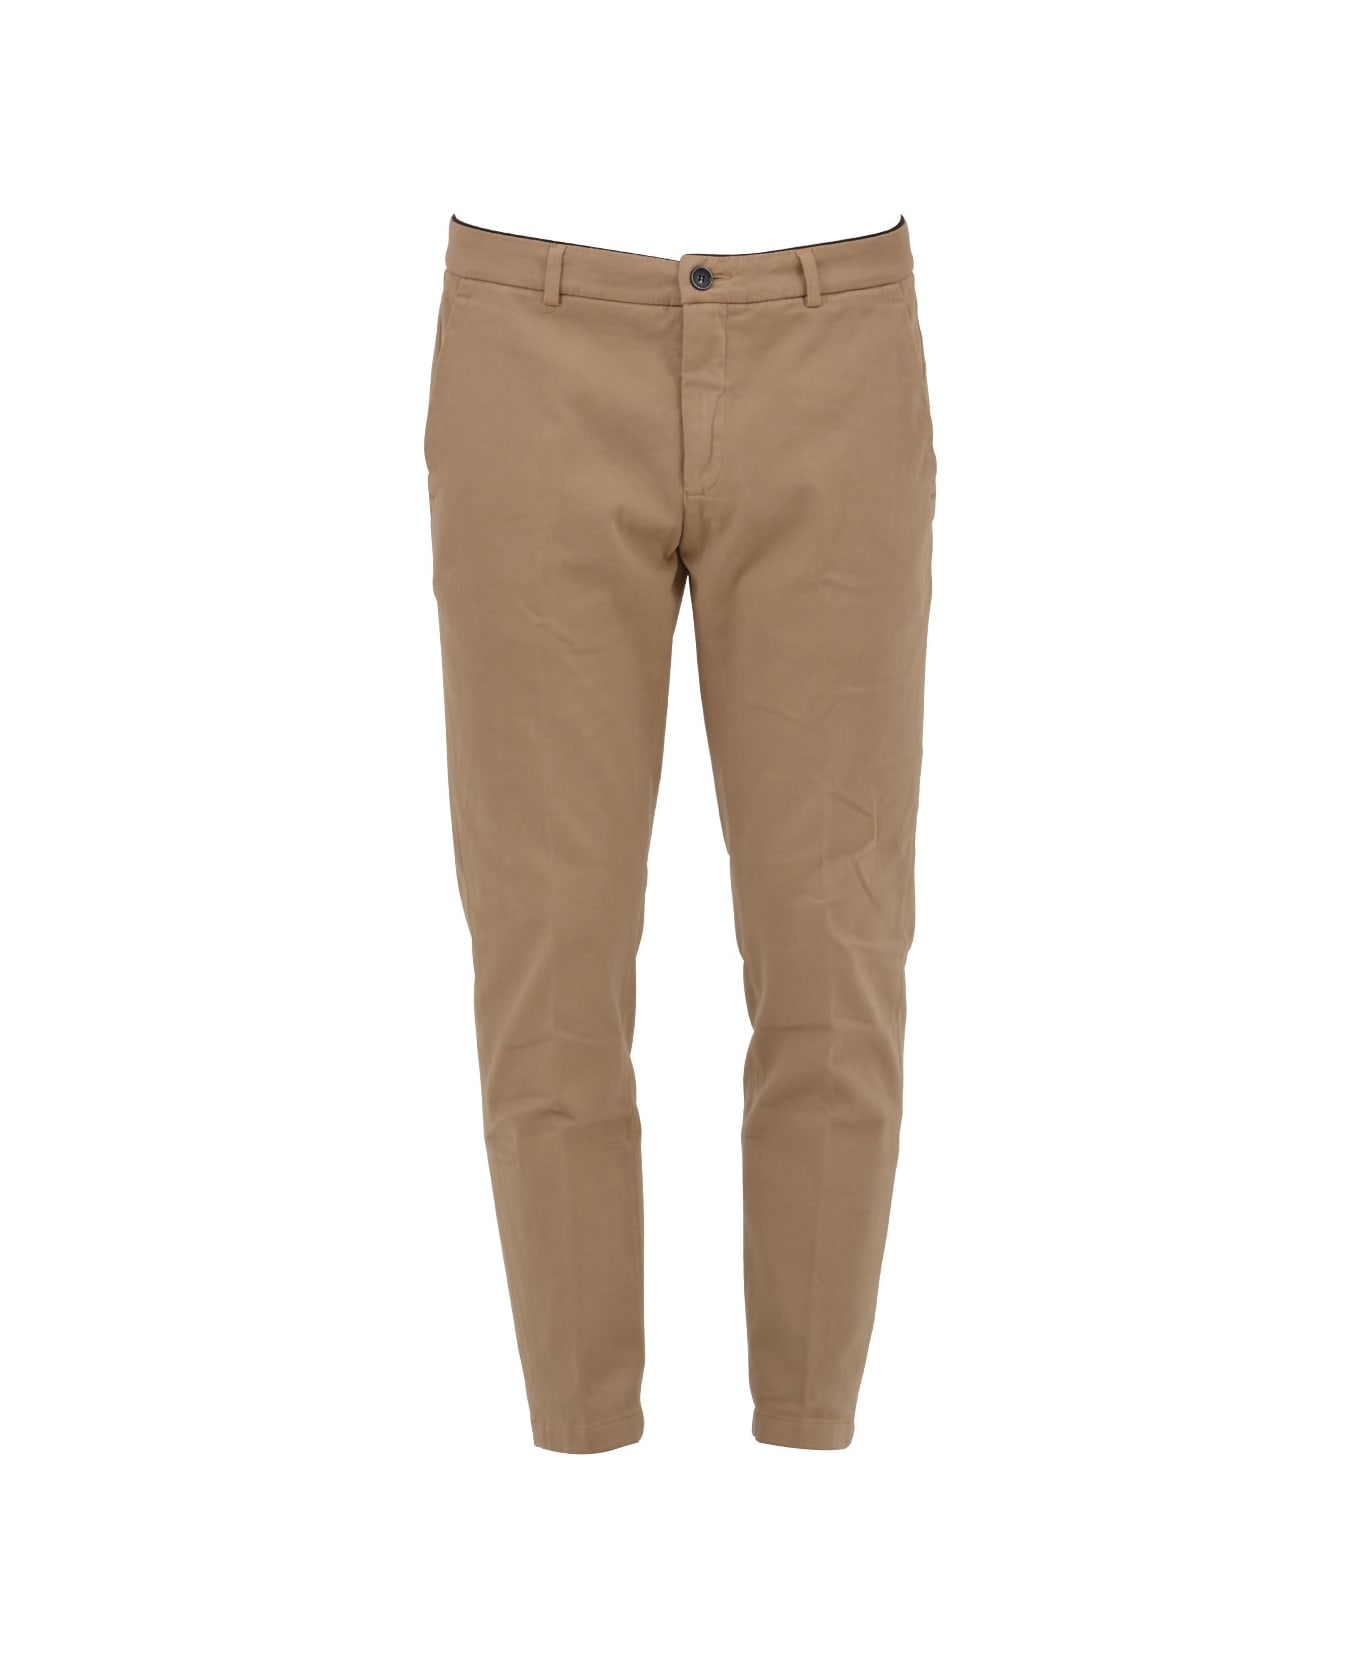 Department Five Chino Trousers - BEIGE ボトムス